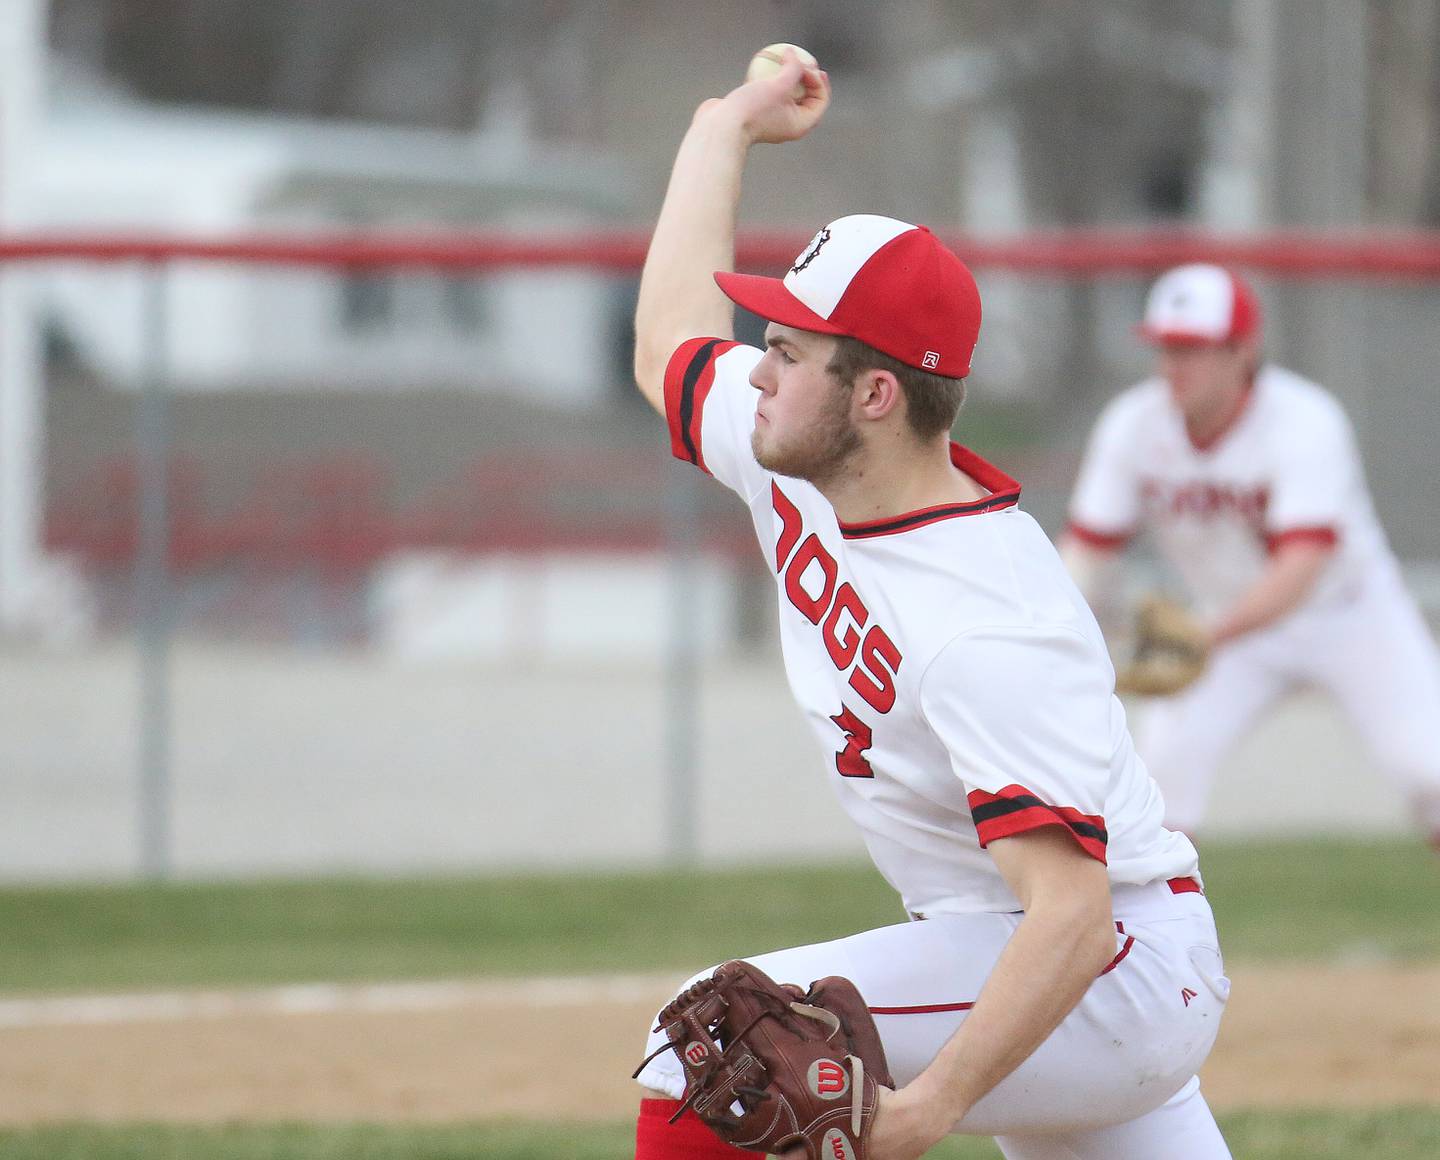 Streator's Landon Muntz (7) delivers a pitch to a Peotone batter during a game last season in Streator.